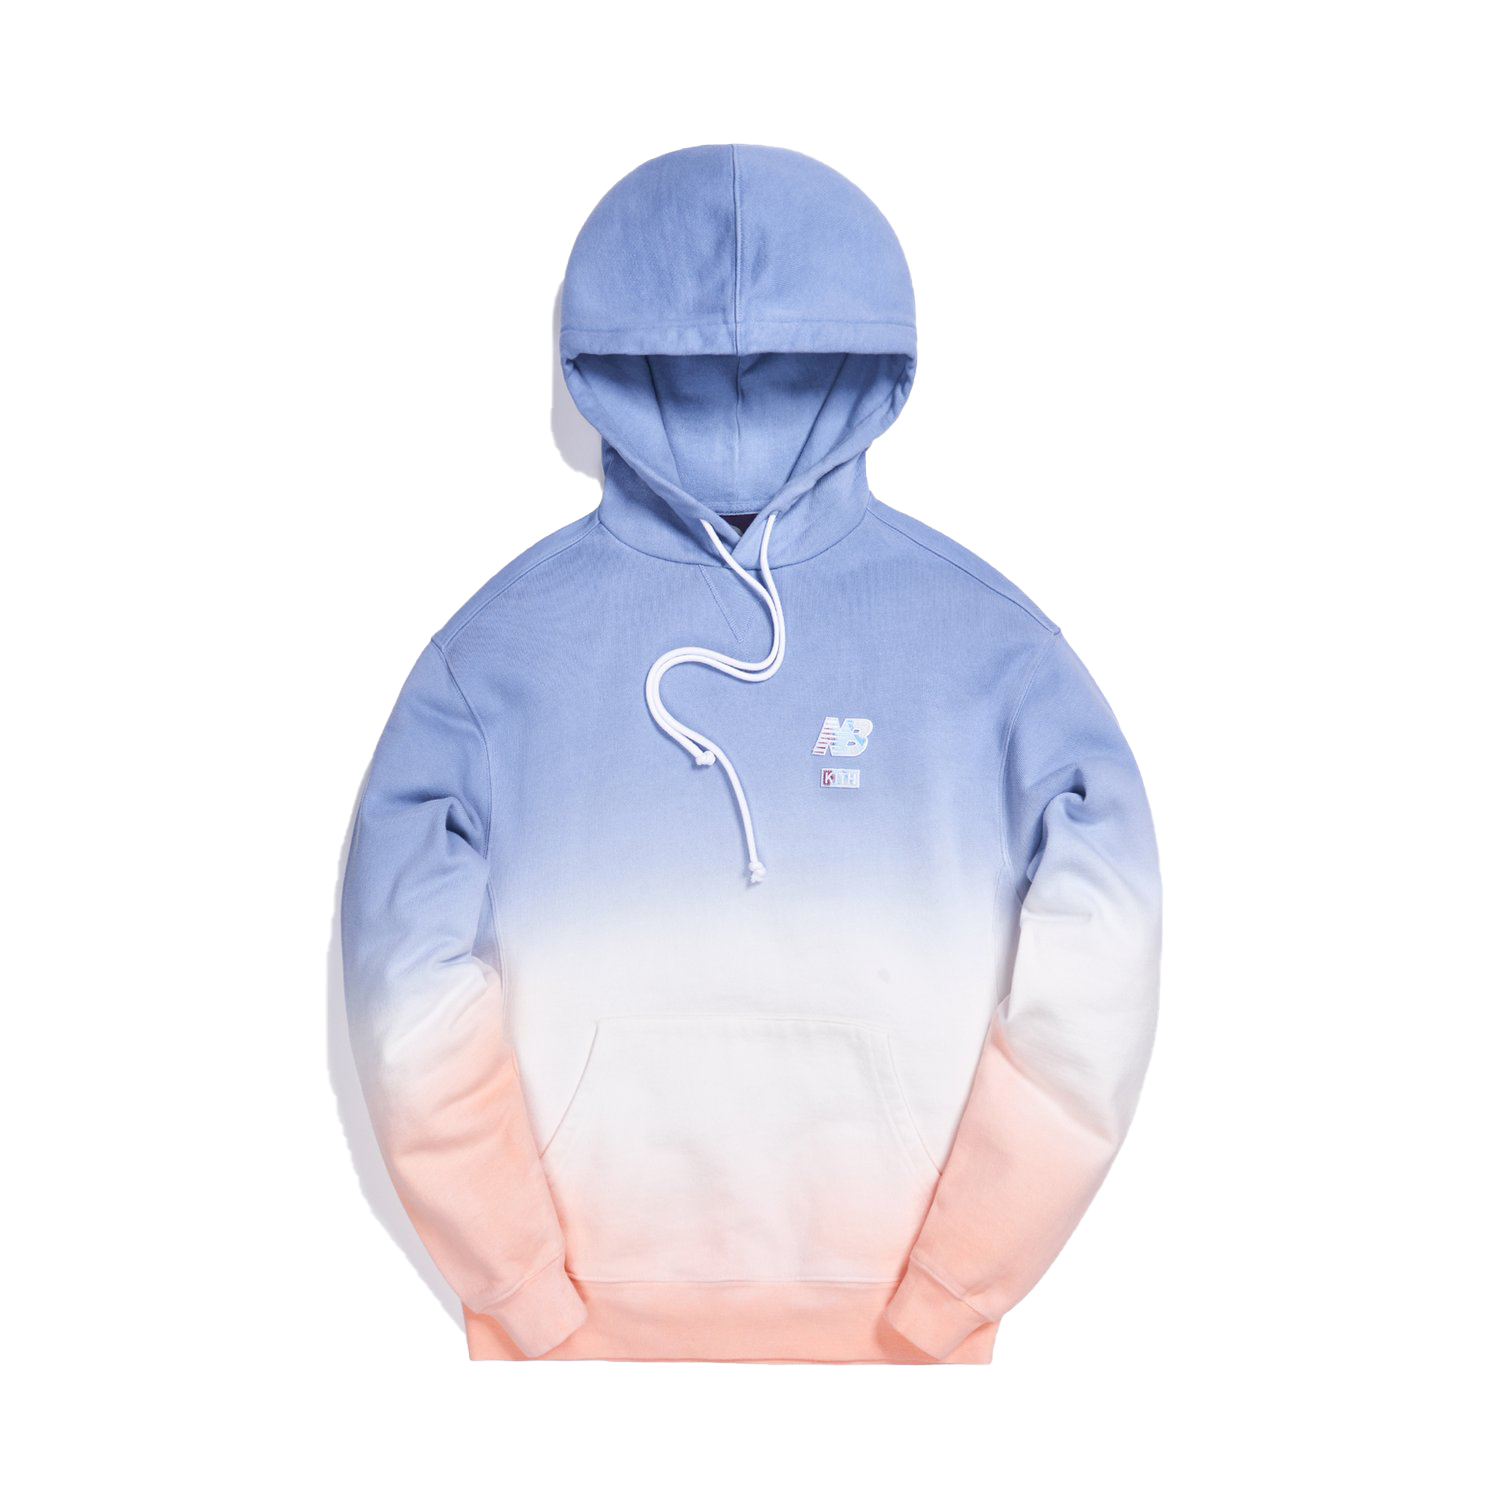 Kith x New Balance Williams III Hoodie Blue Ombre Men's - FW20 - US